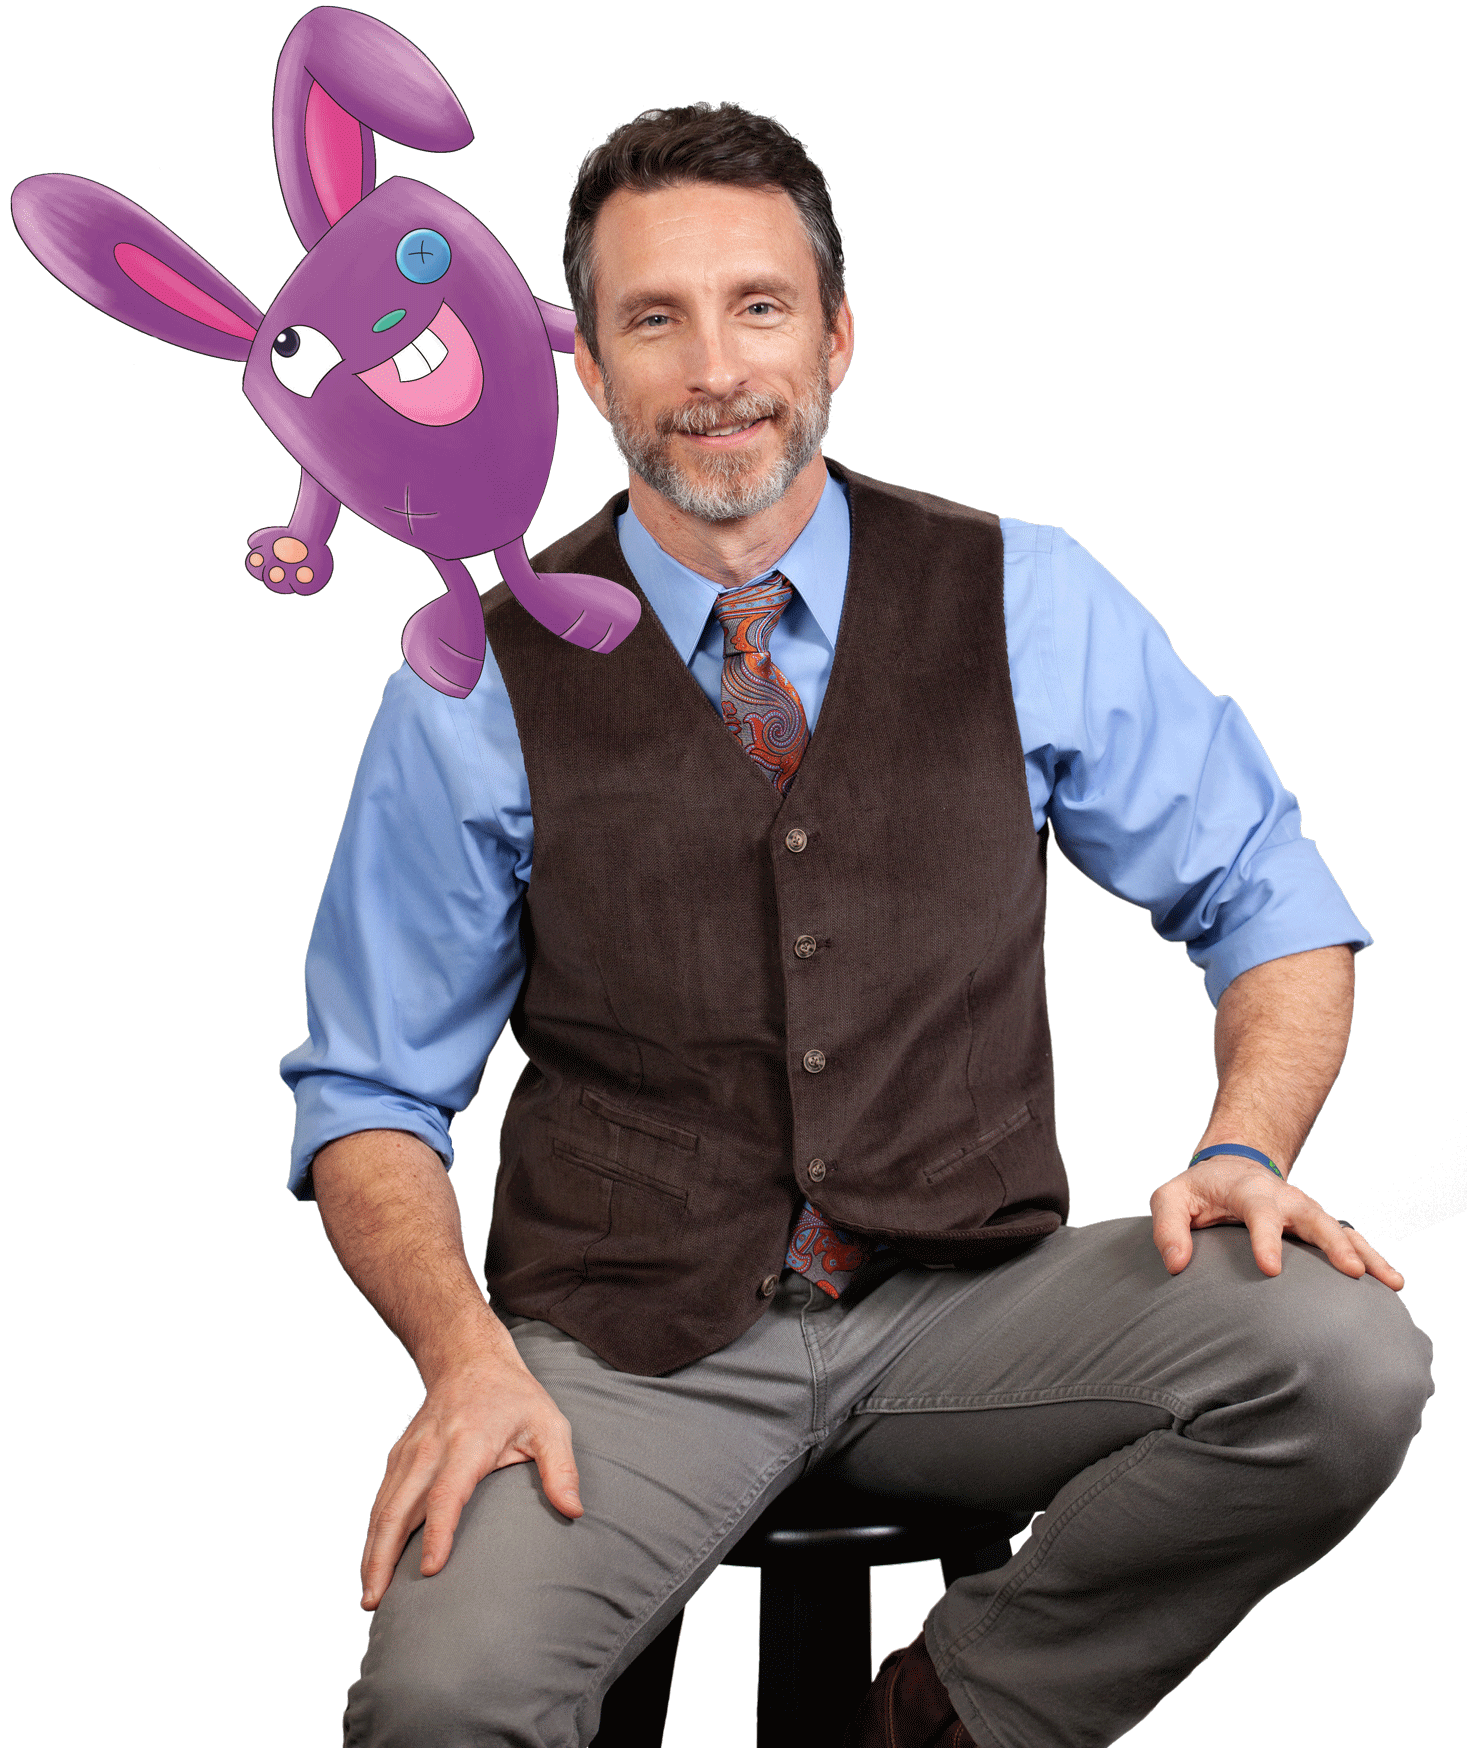 Mike sitting on a black stool, wearing a blue button-up and brown vest with an illustrated, purple bunny standing on his shoulder.